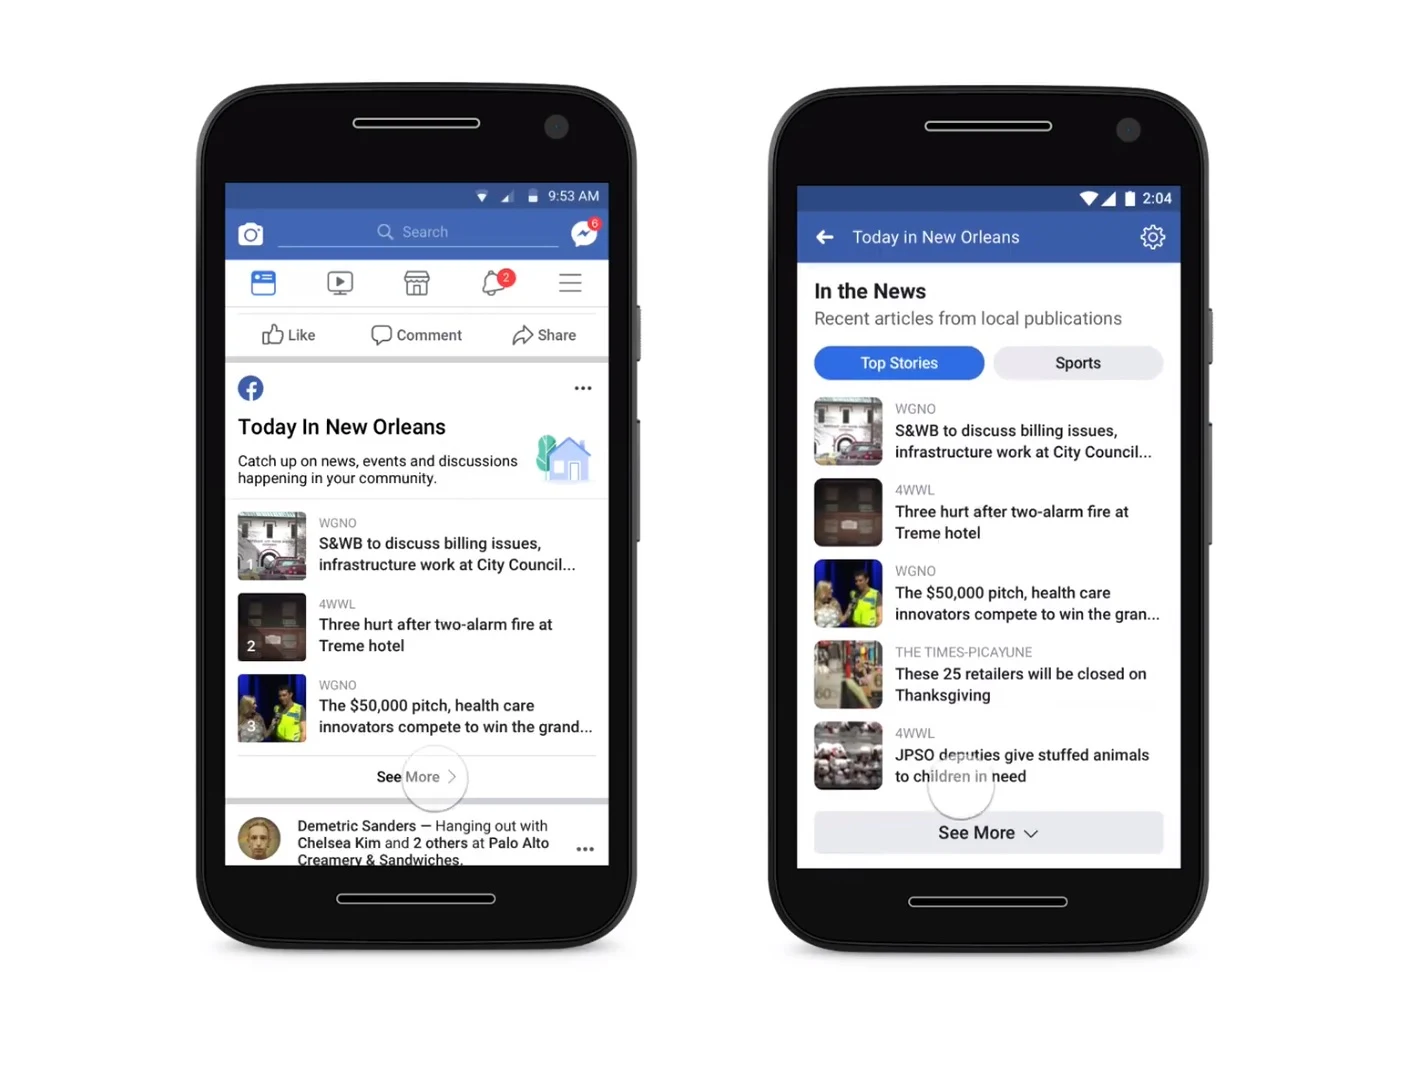 Facebook Launches Local News Feature in 400 Cities